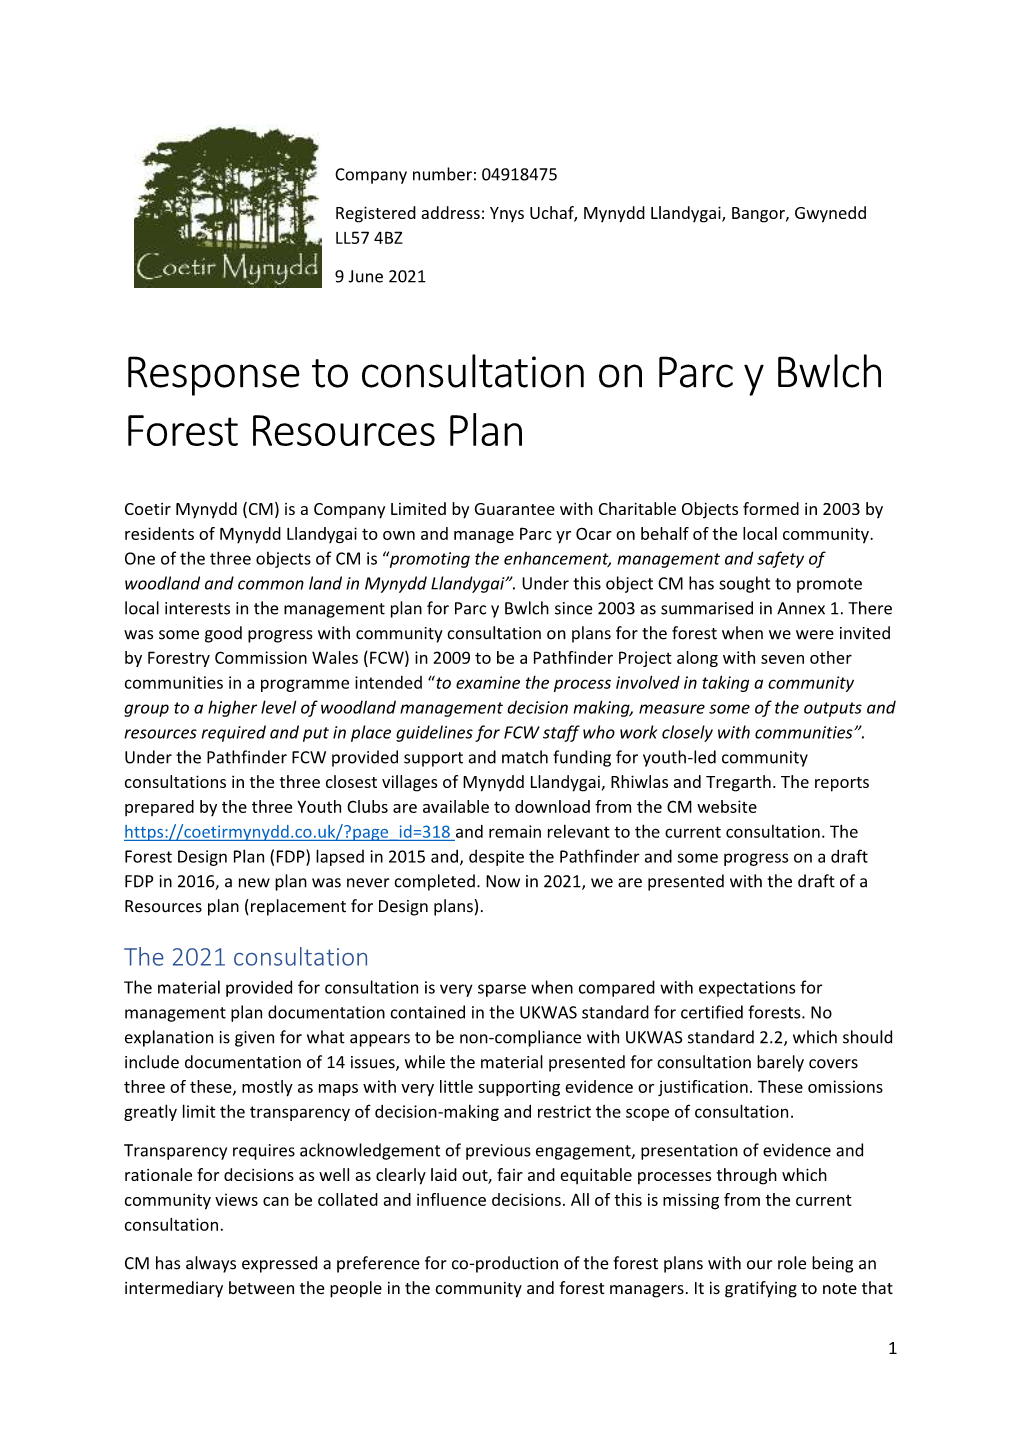 Response to Consultation on Parc Y Bwlch Forest Resources Plan